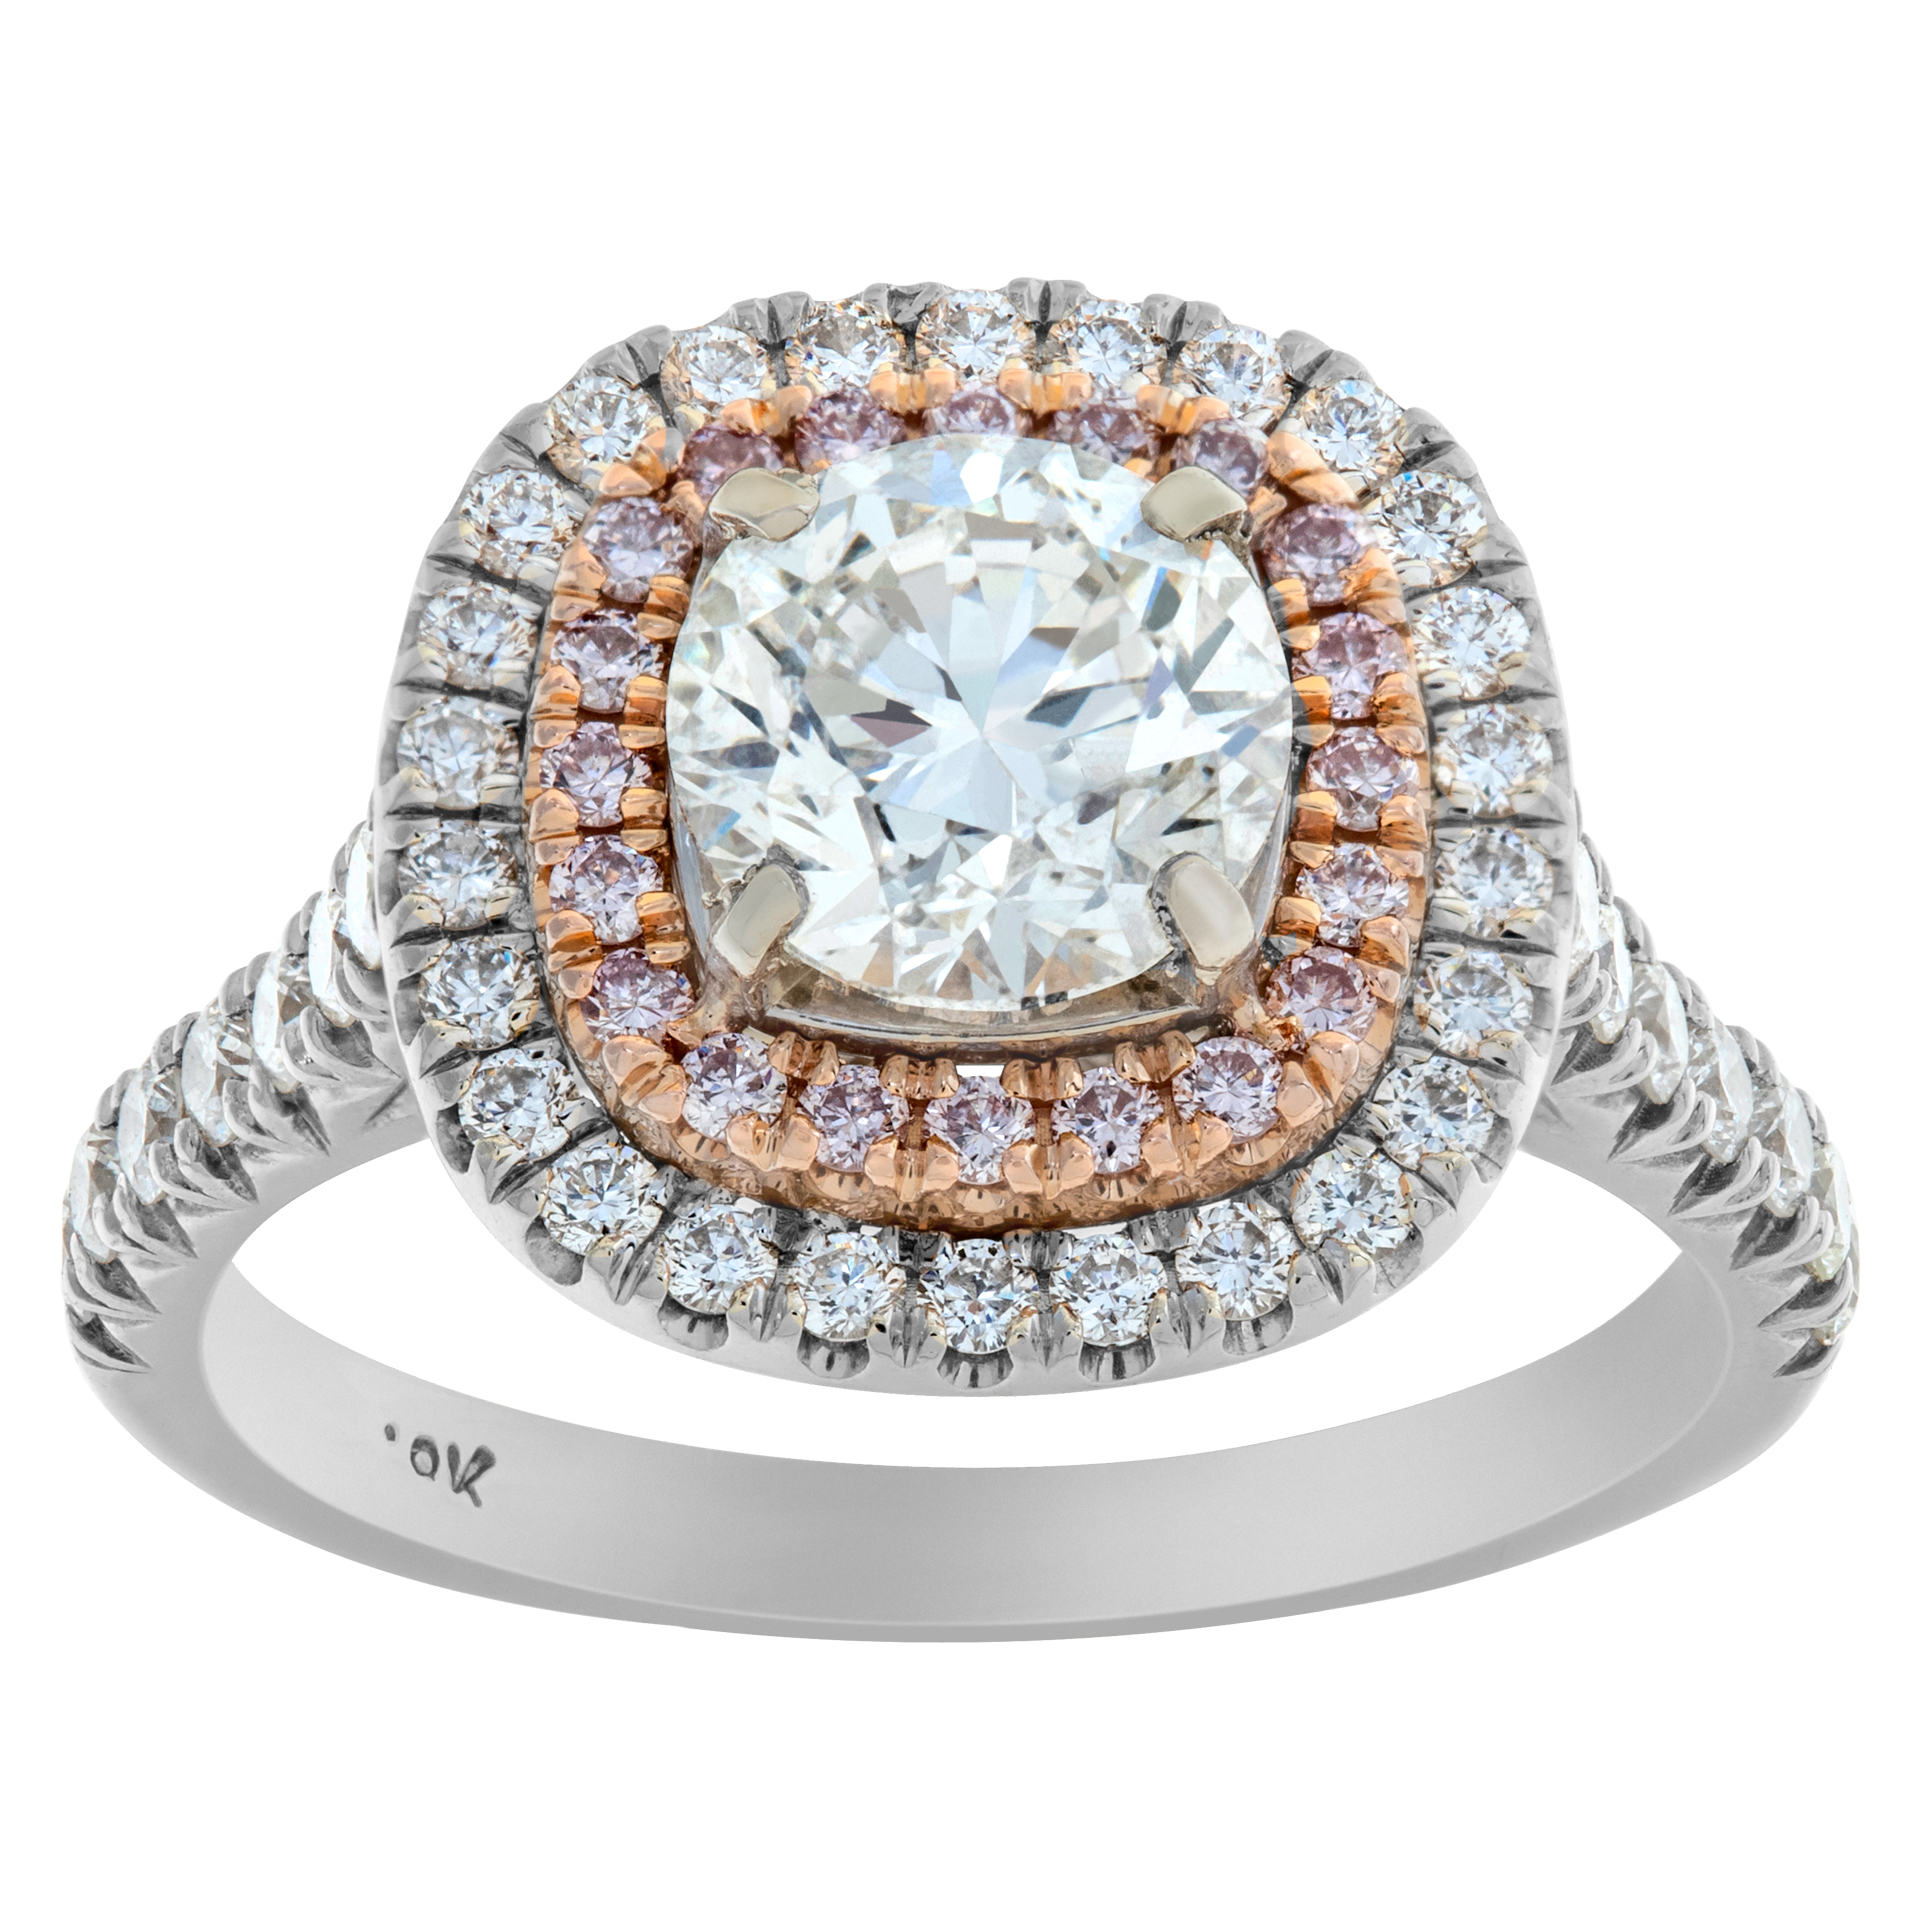 Diamond ring in 18k white and rose gold with approx 1 carat center diamond